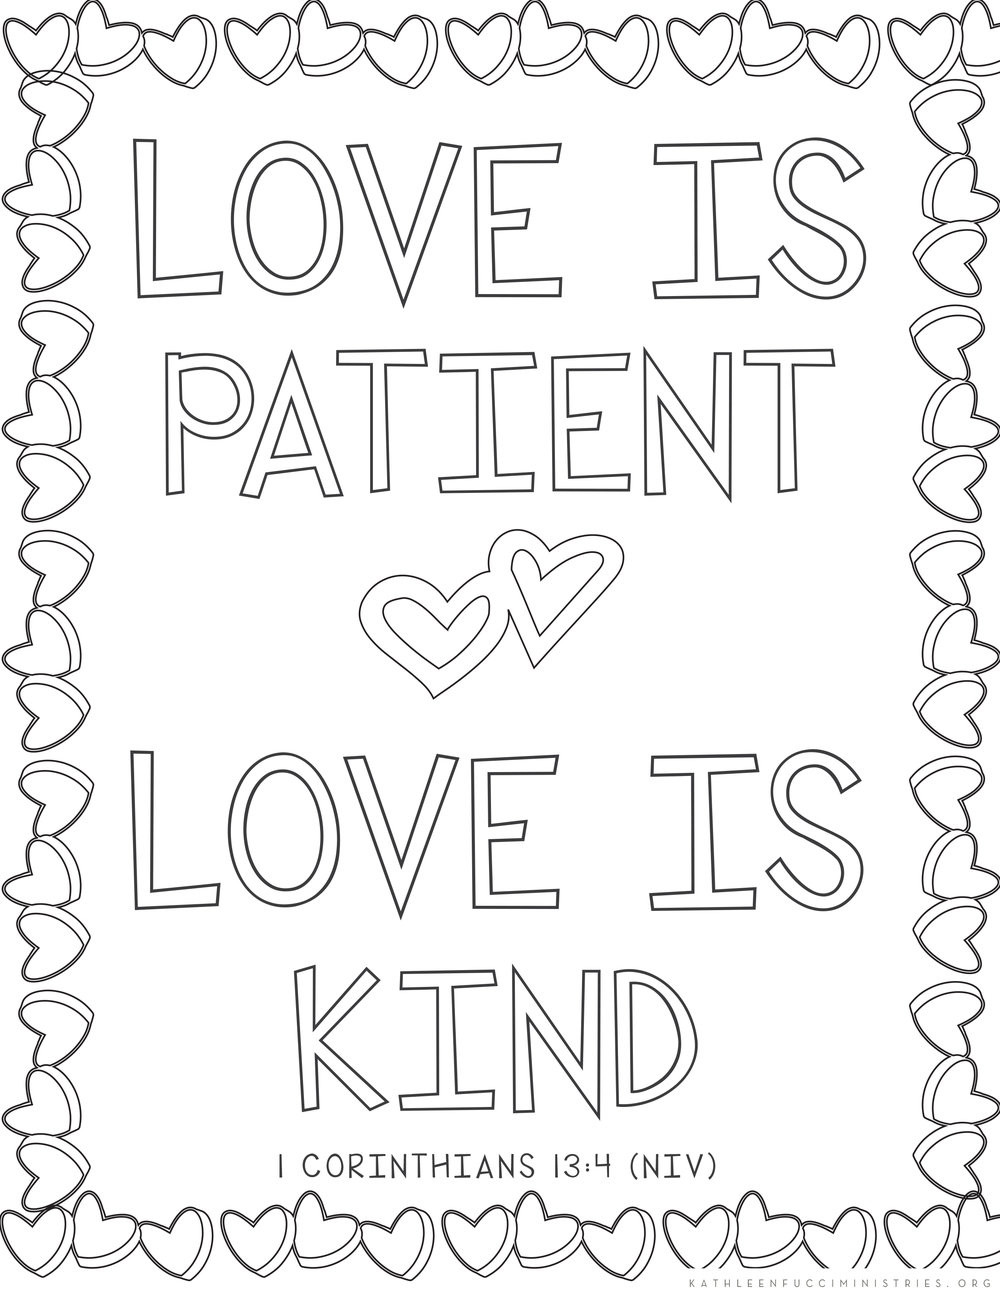 Bible Verse Coloring Pages Free Printable
 Bible Coloring Pages Pdf Gallery Coloring For Kids 2019